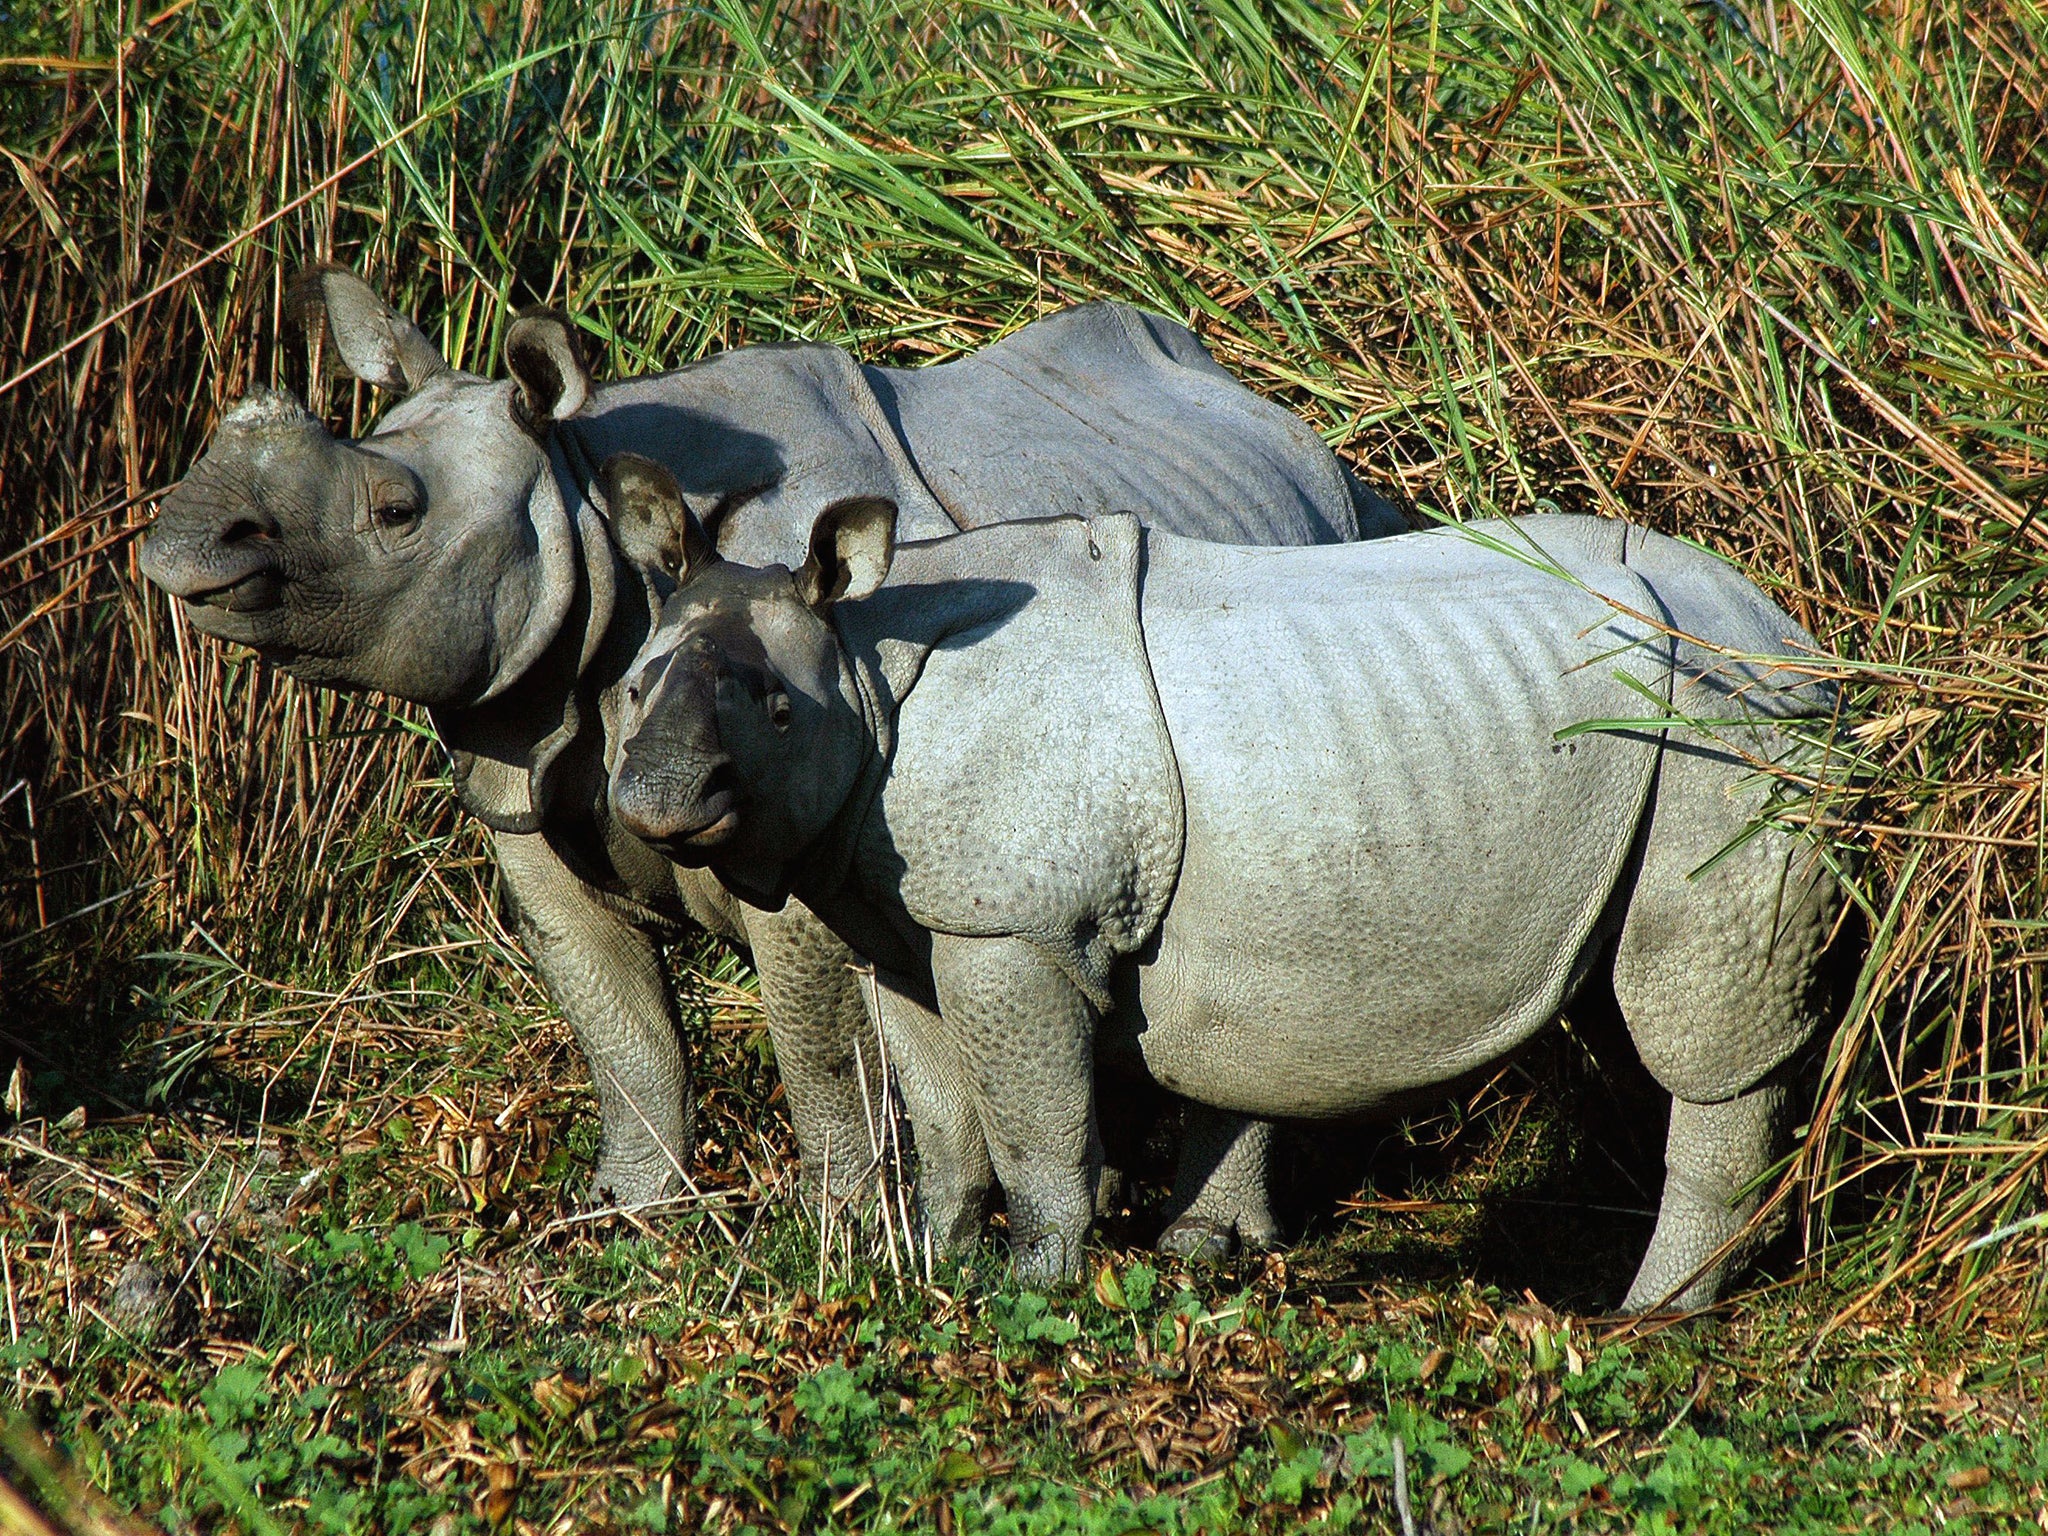 Park rangers in Kaziranga are instructed to ‘shoot-on-sight’ if they spot suspected rhino poachers